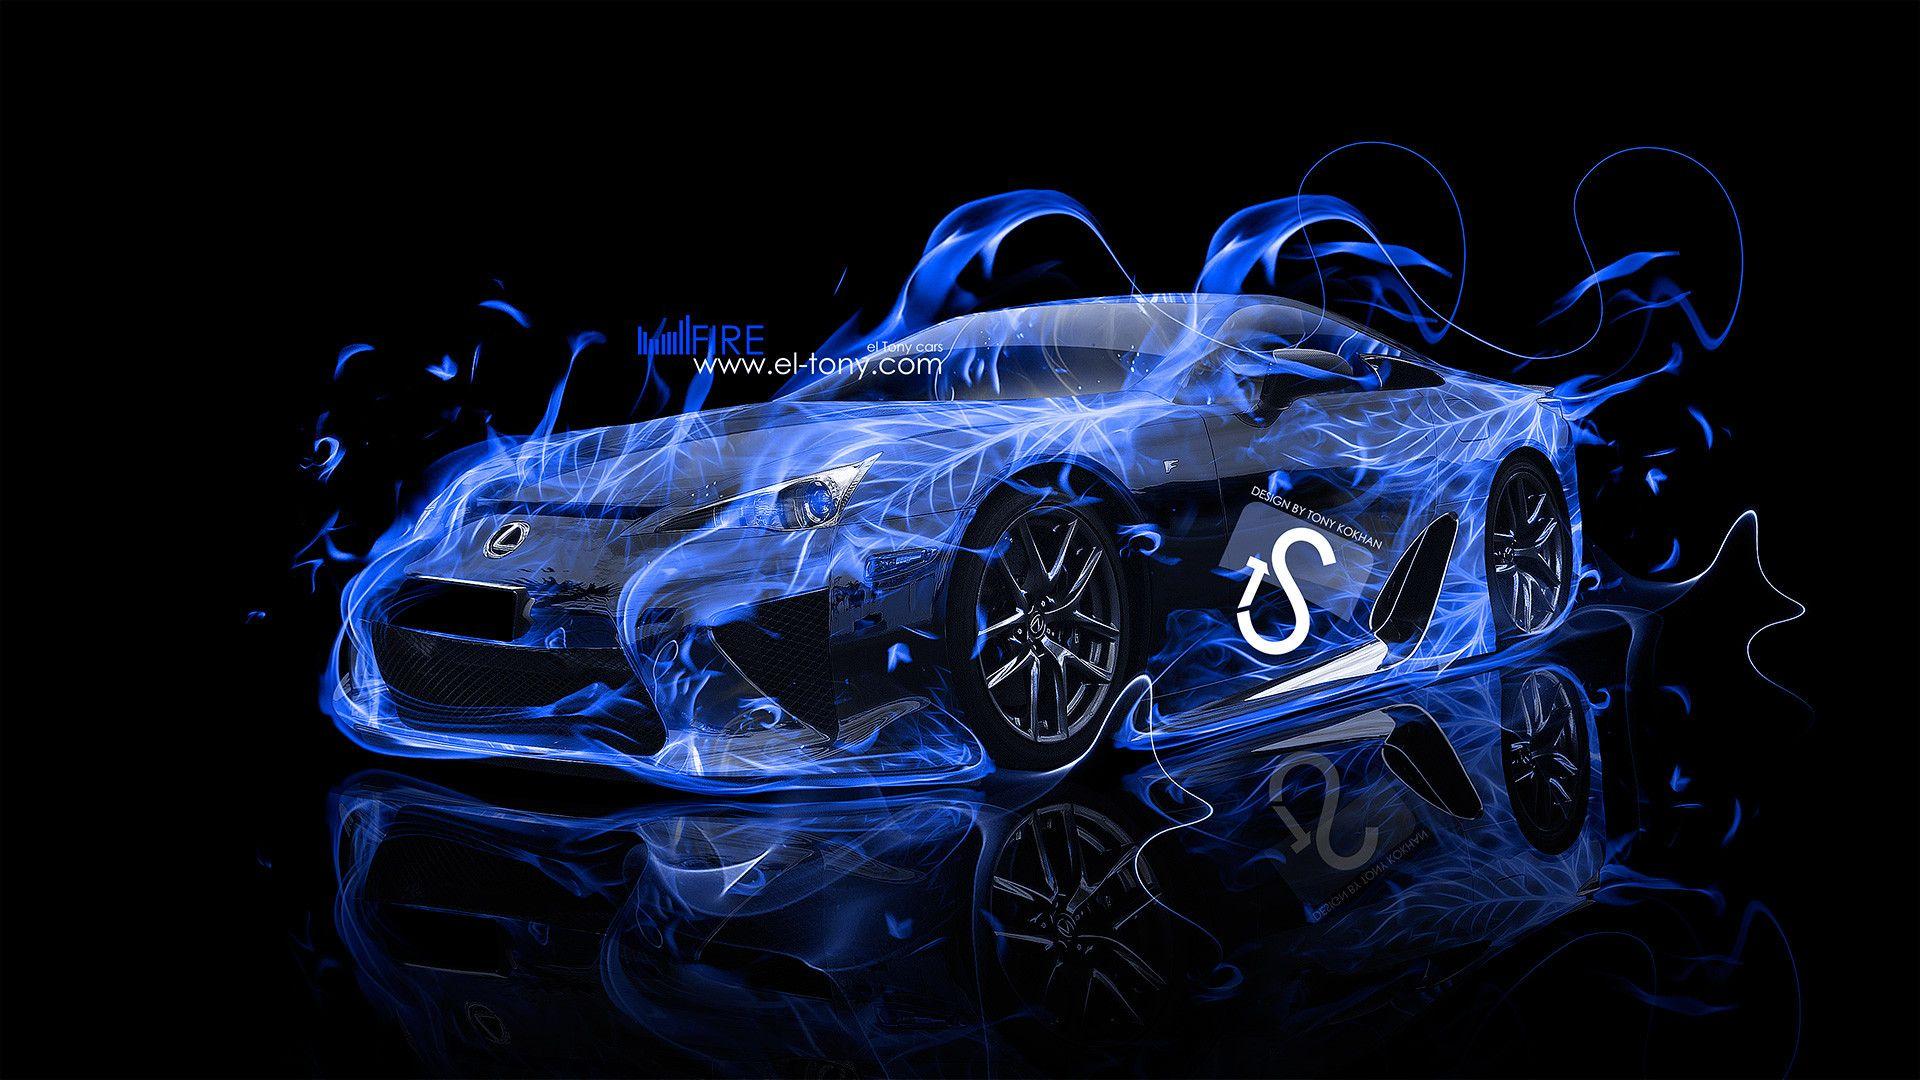 Car with Flames Wallpaper Free Car with Flames Background